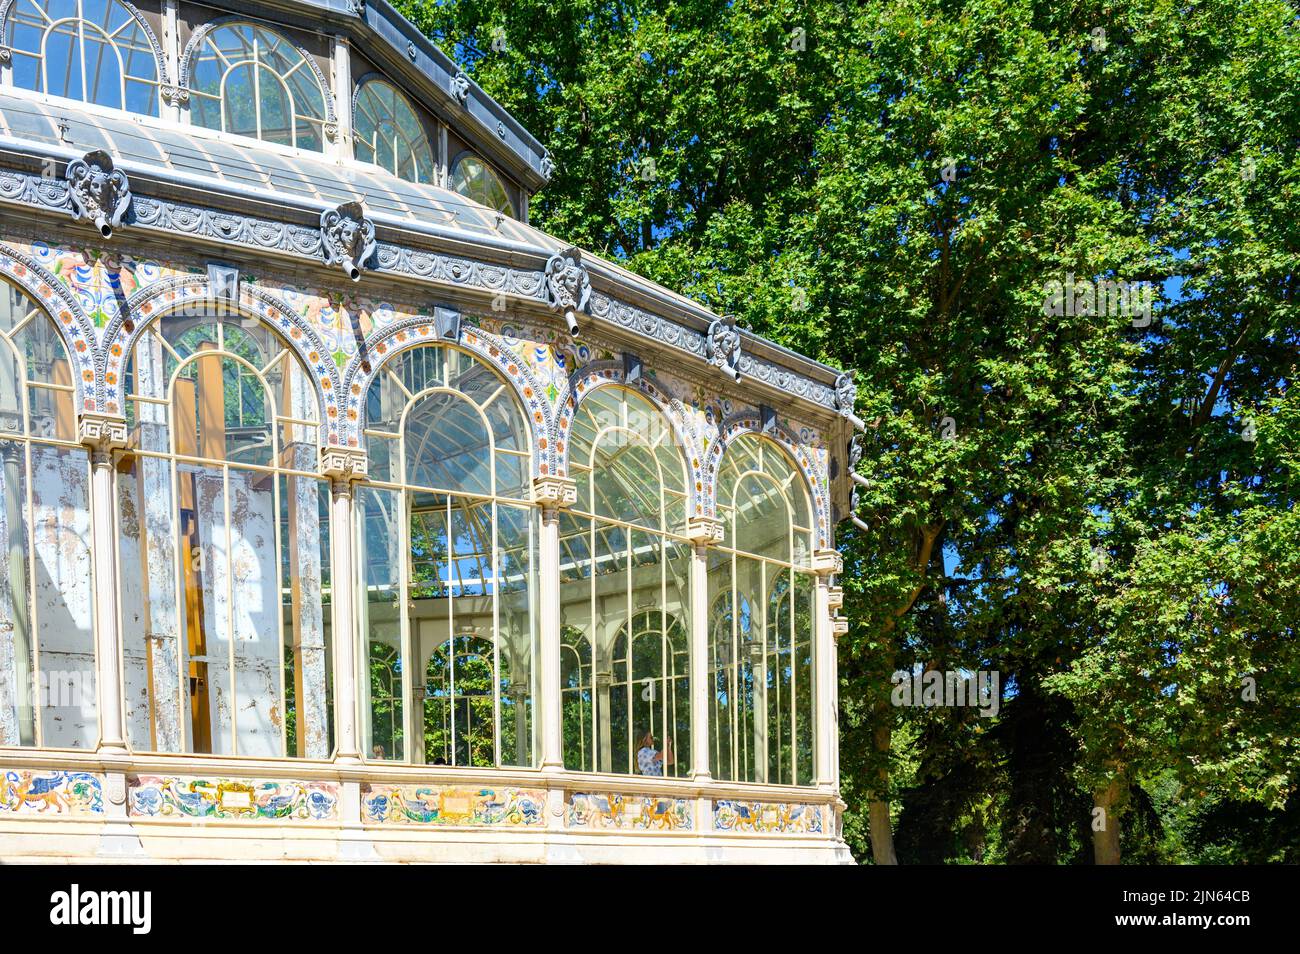 Exterior structure of the Palacio de Cristal which is located in the Parque del Buen Retiro. The building is made of glass and iron decorated with cer Stock Photo